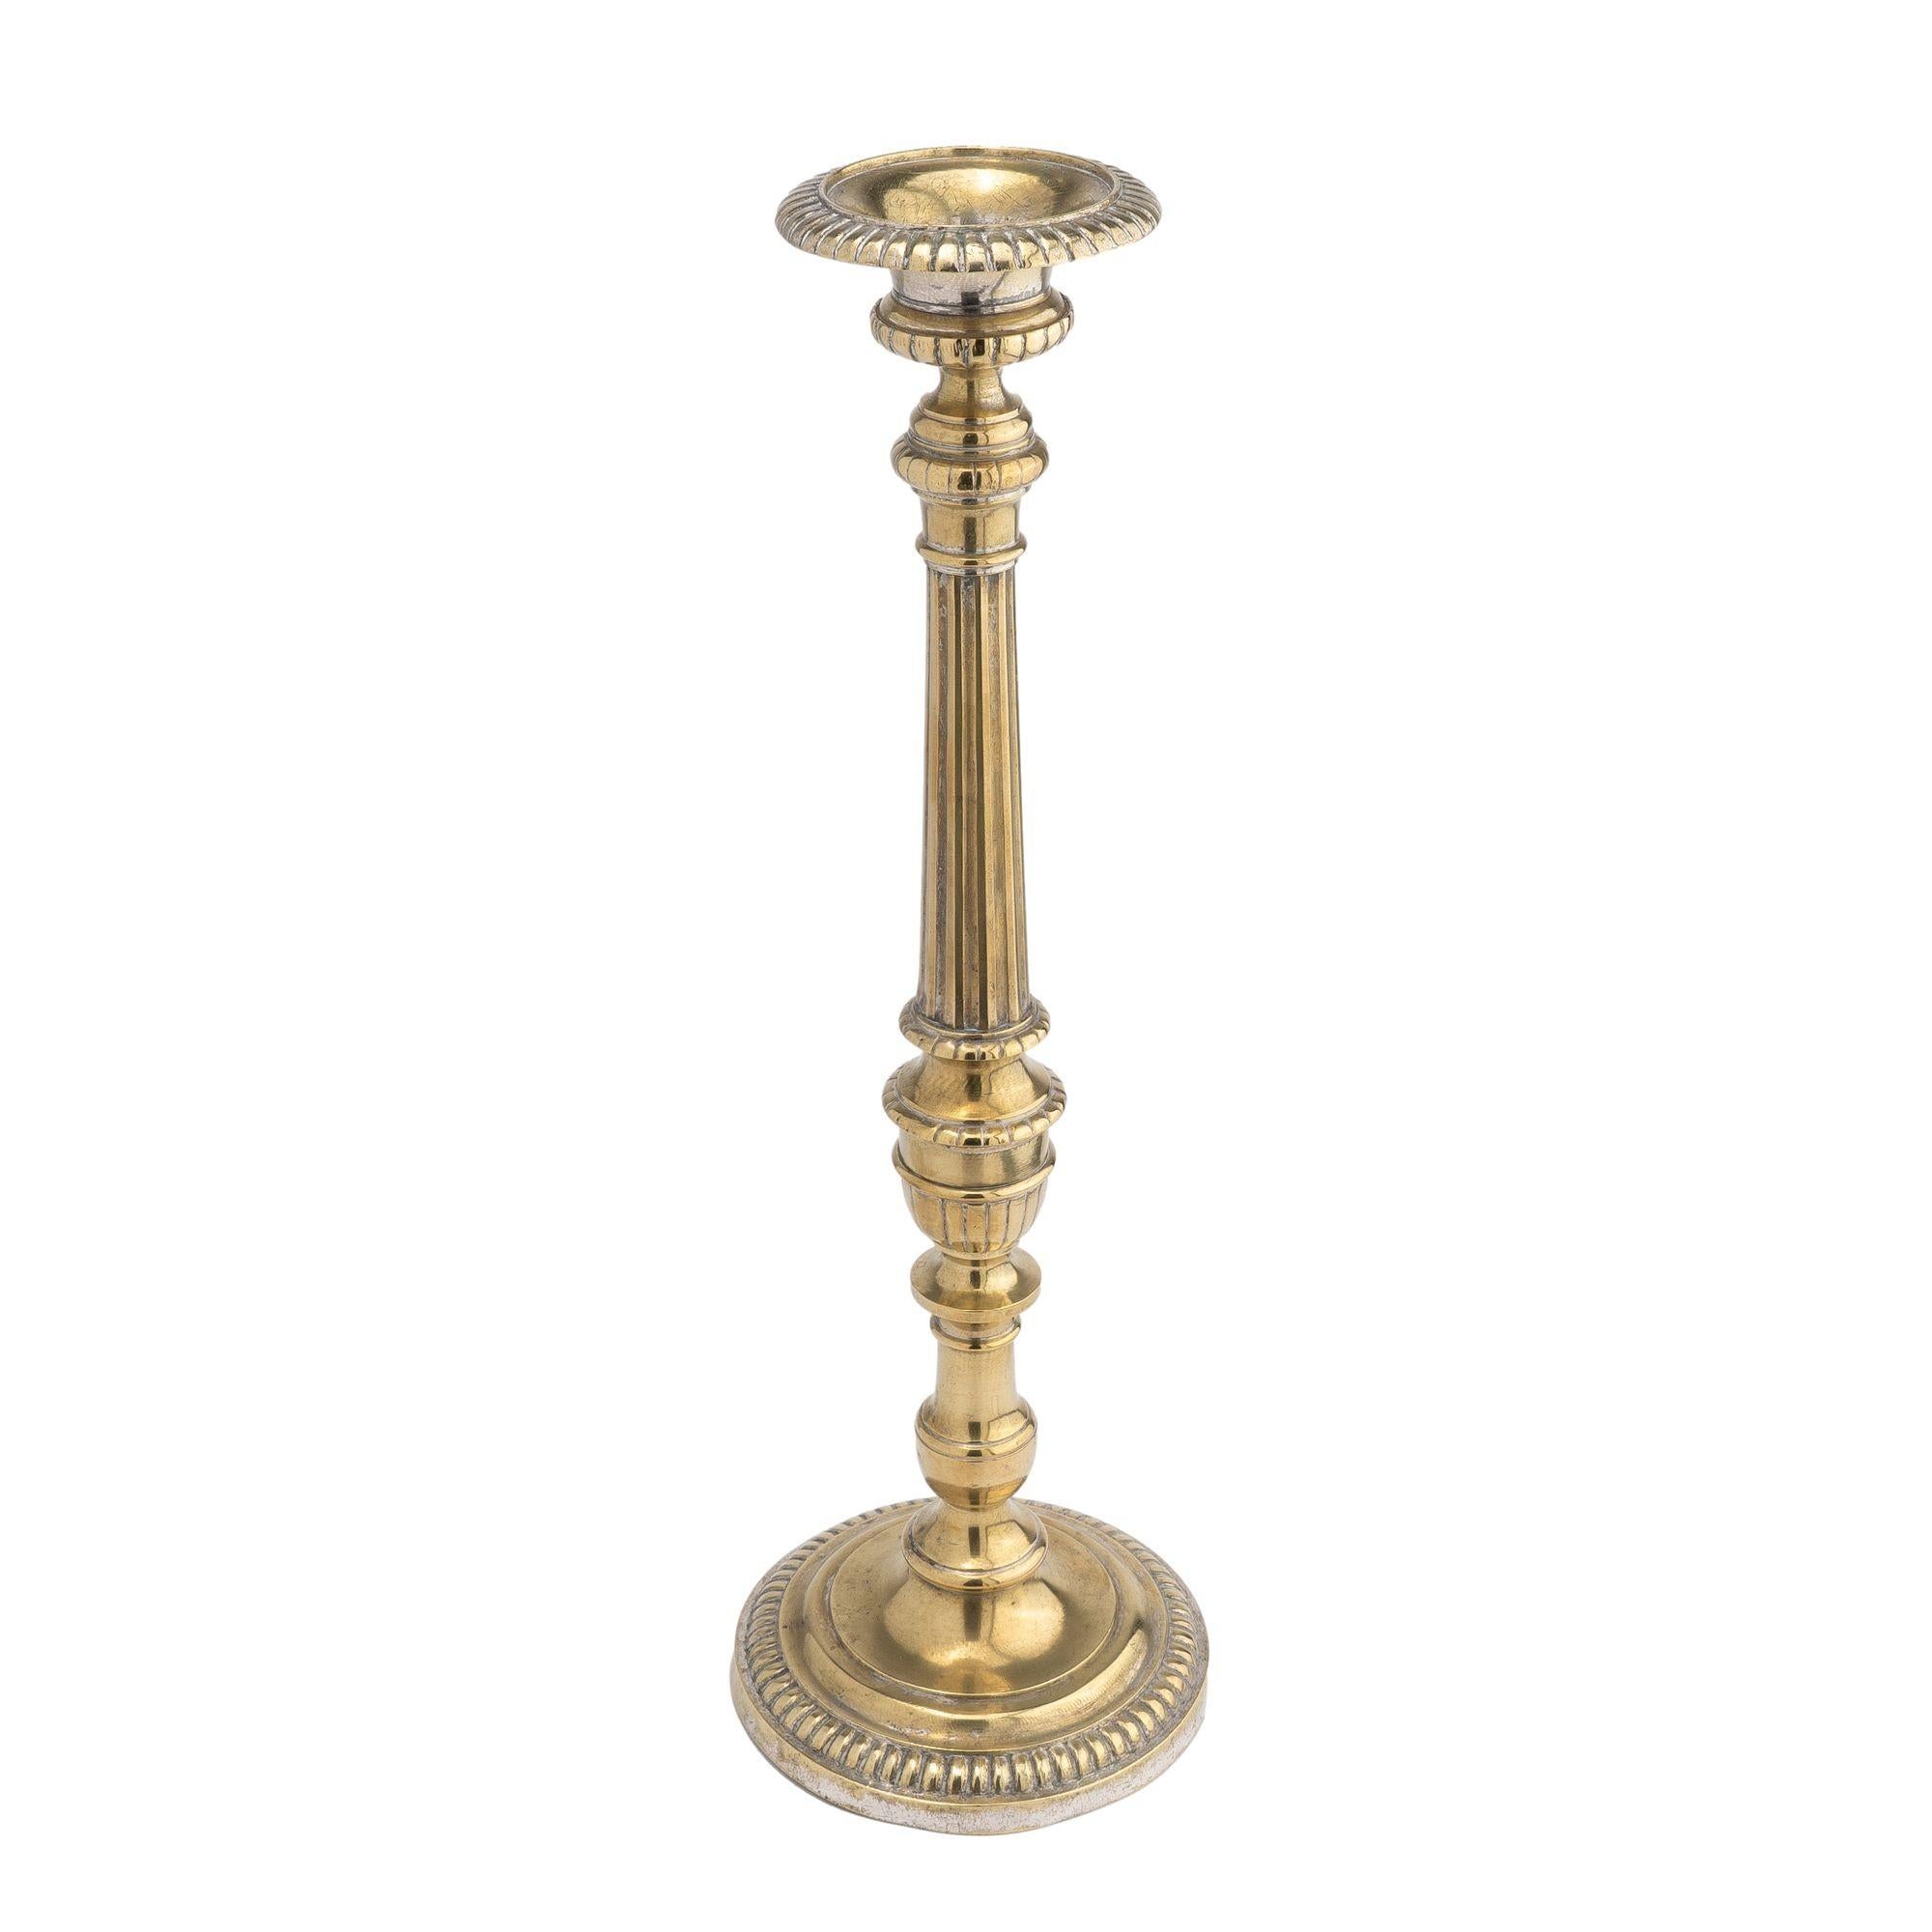 Core cast brass altar candlestick with traces of original silvering. The design features a calyx urn form candle cup on a fluted column over two variations of urn form turnings, threaded to a domed circular base with beaded edge.

France, circa